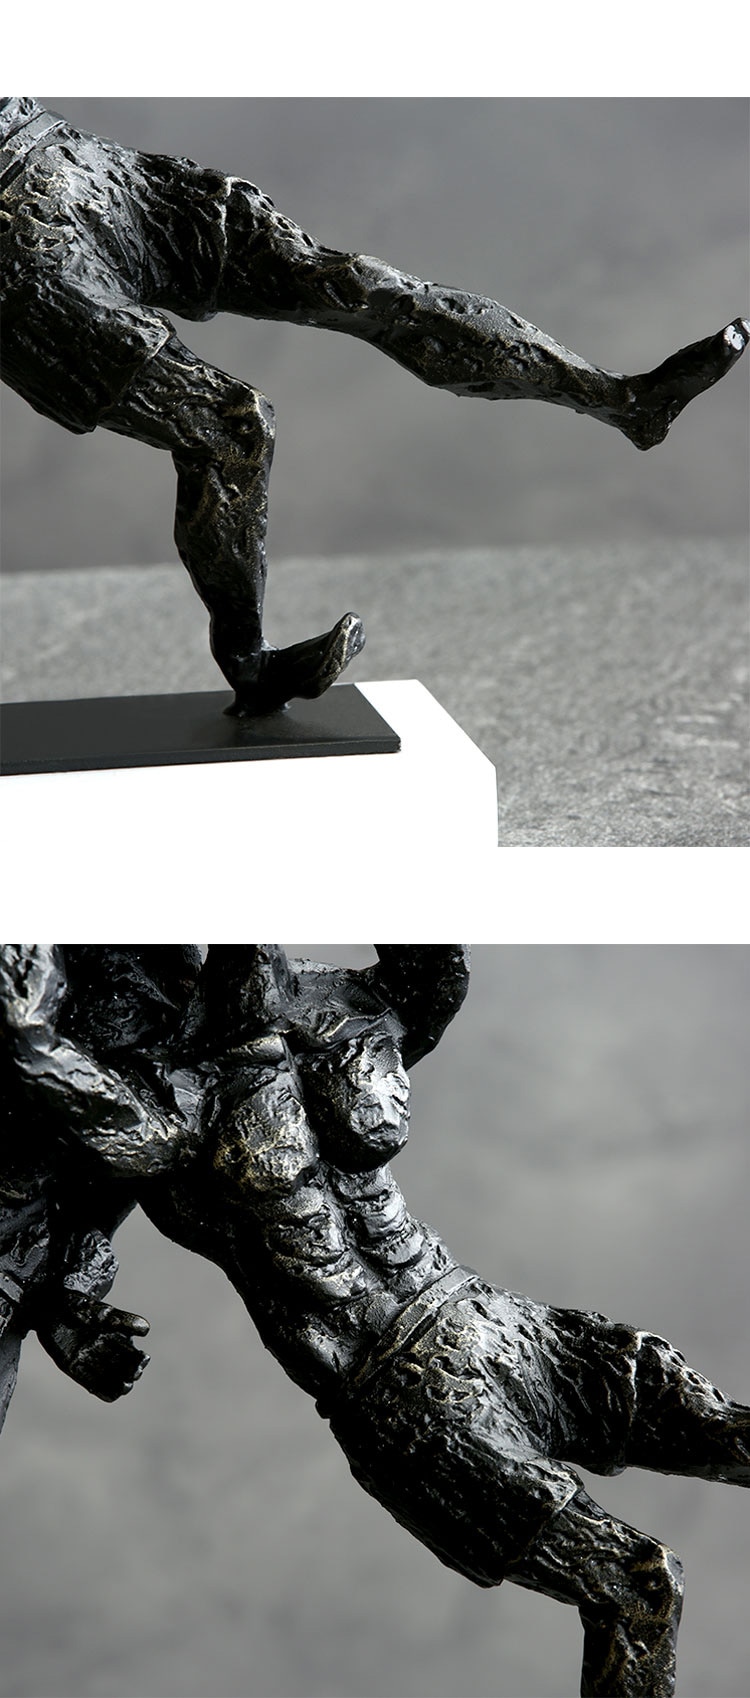 Modern Two Black Strong Men Doing Wrestling Statue Metal Sculpture Home Art Gift Figurines Home Decor White Marble Accessories